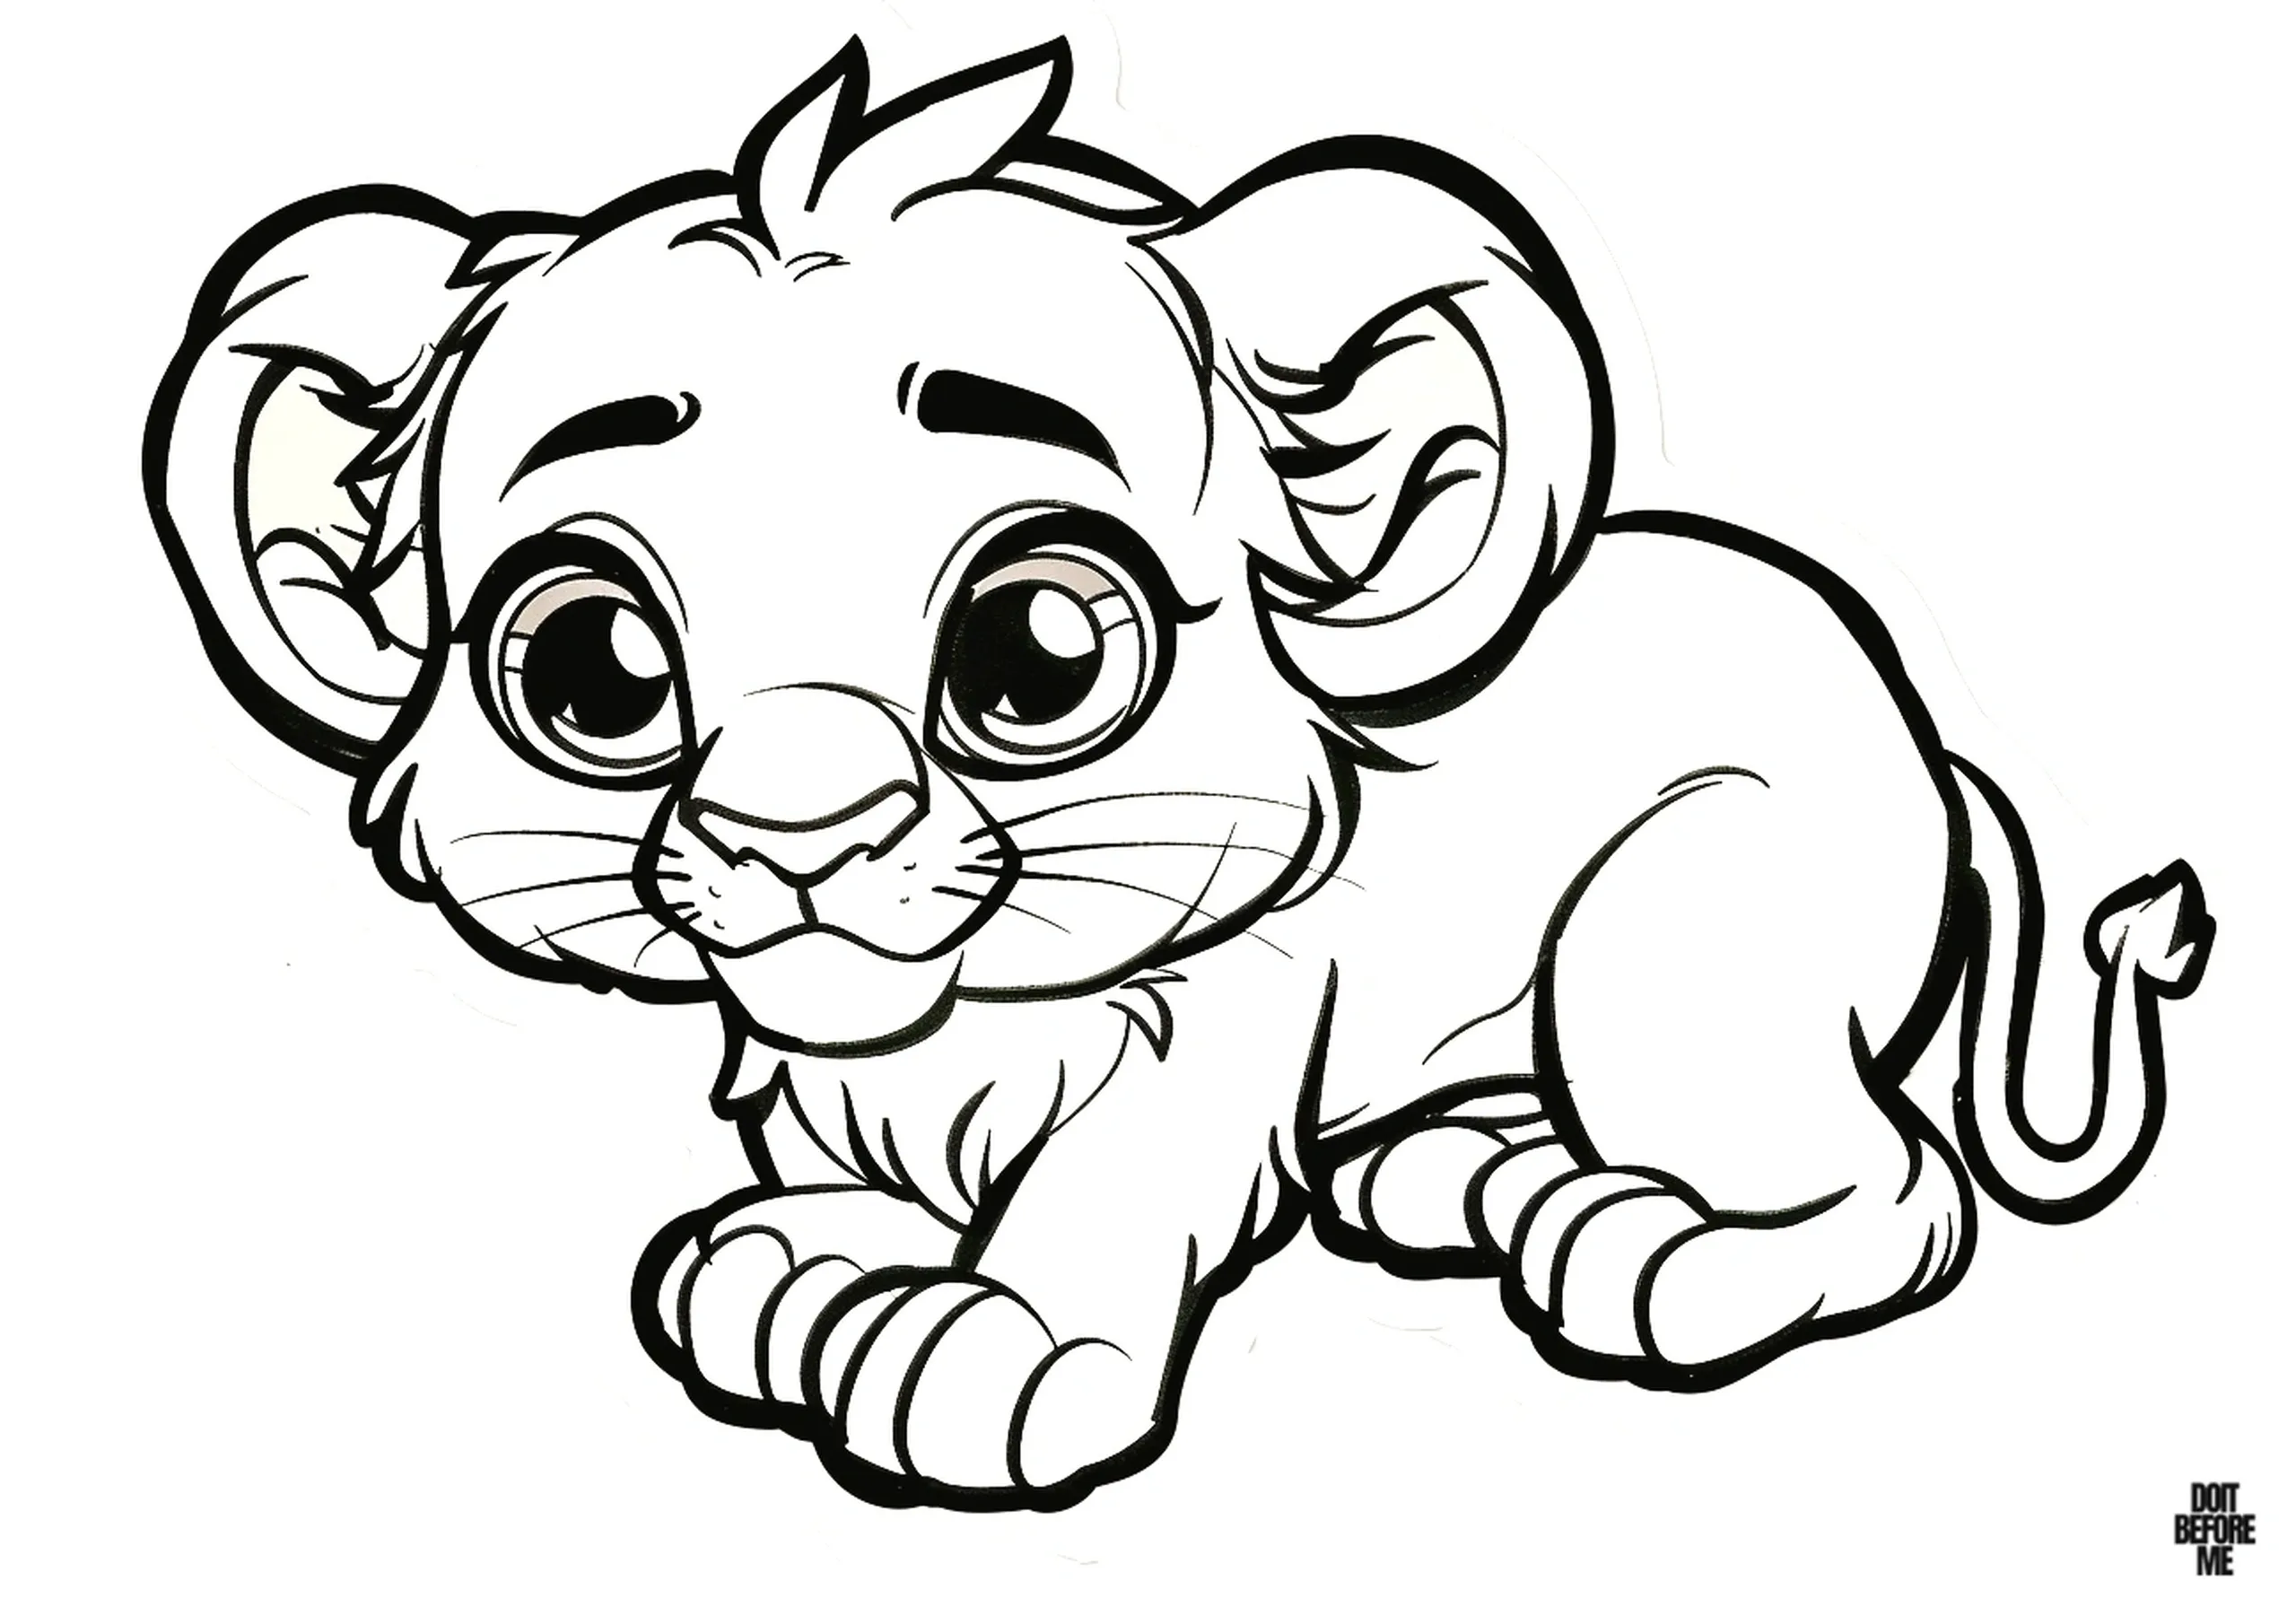 Printable coloring page featuring a baby lion cub. Due to its easy design, it is suitable for preschoolers.